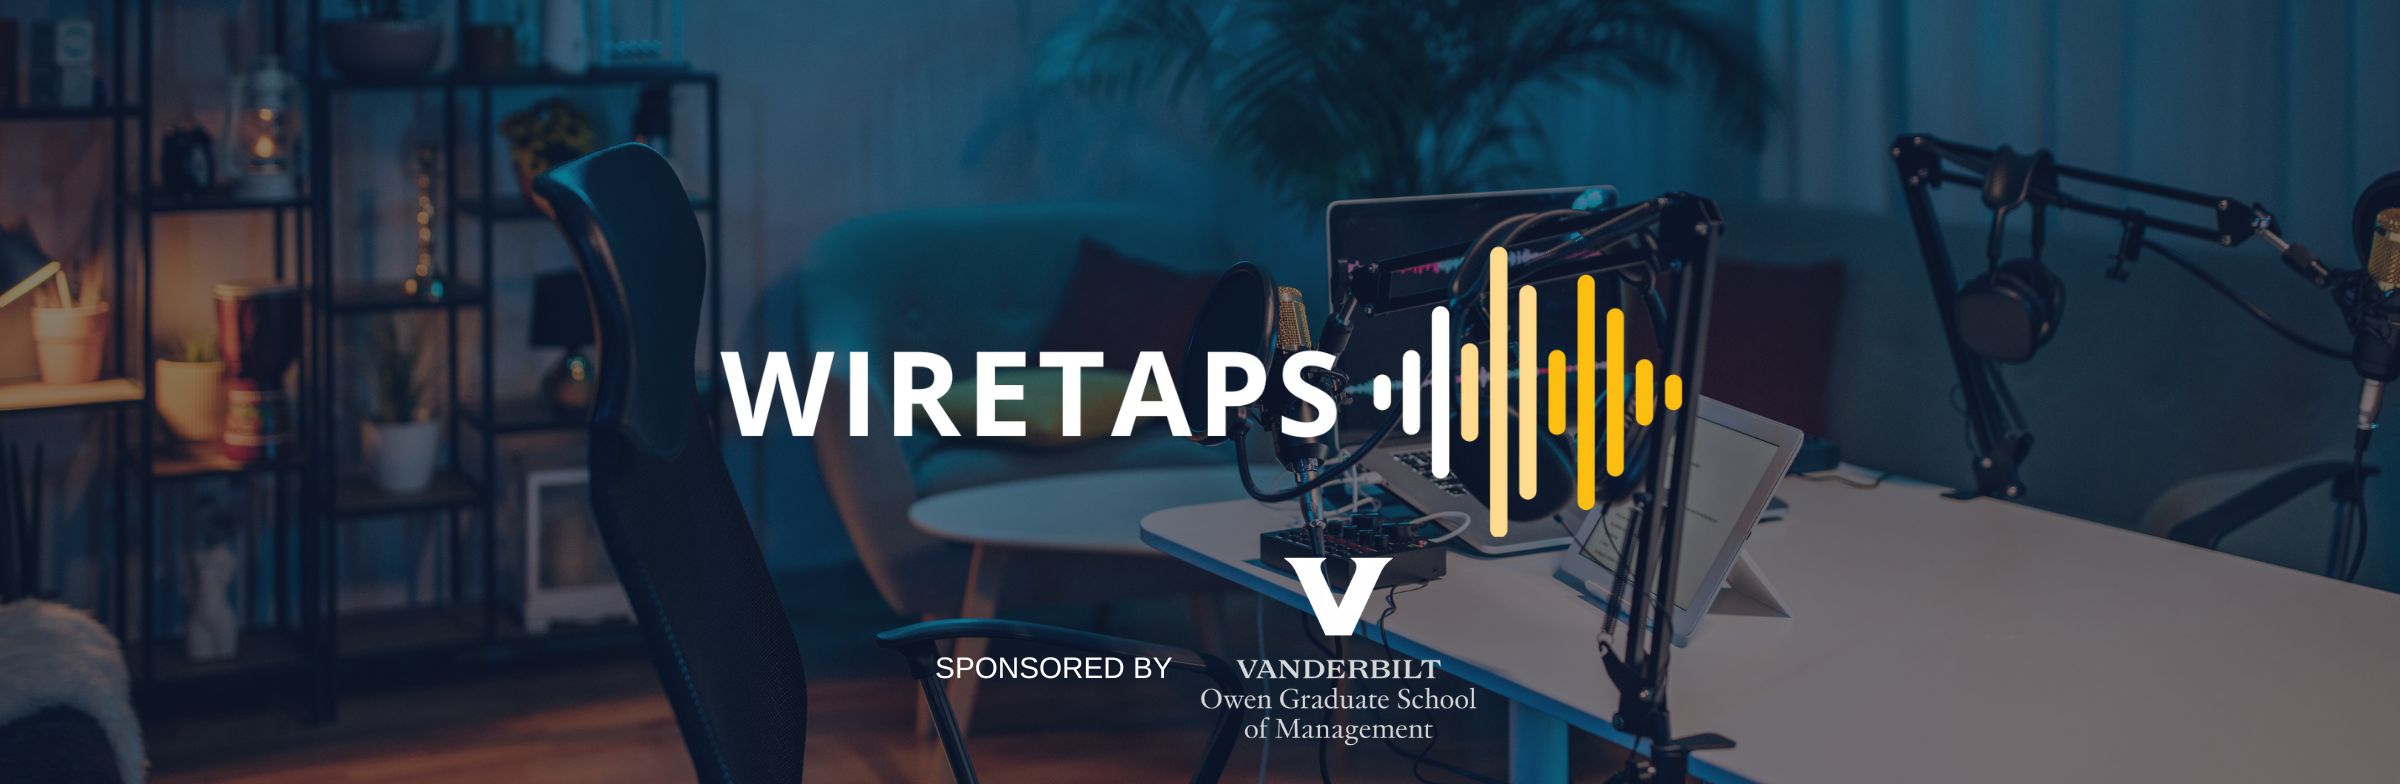 Episode 345 of Clear Admit's MBA Admissions Wire Taps Podcast